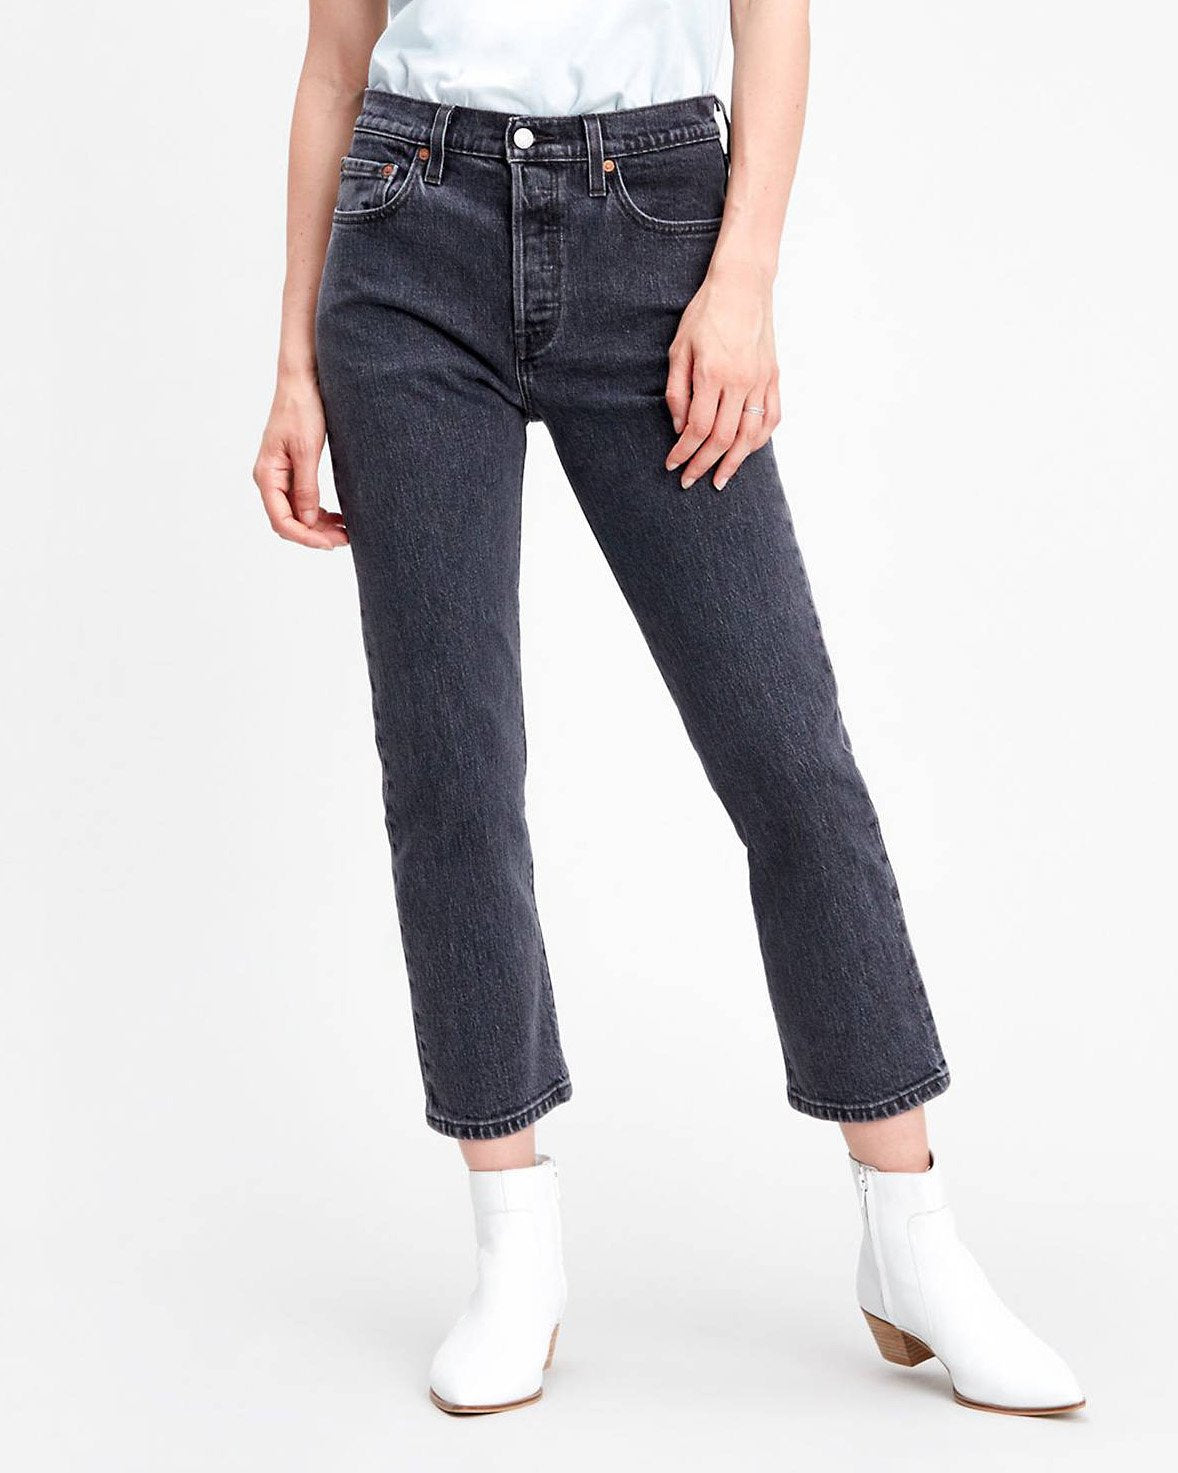 Levi's® Womens 501 Crop Jeans - Mesa Cabo Fade